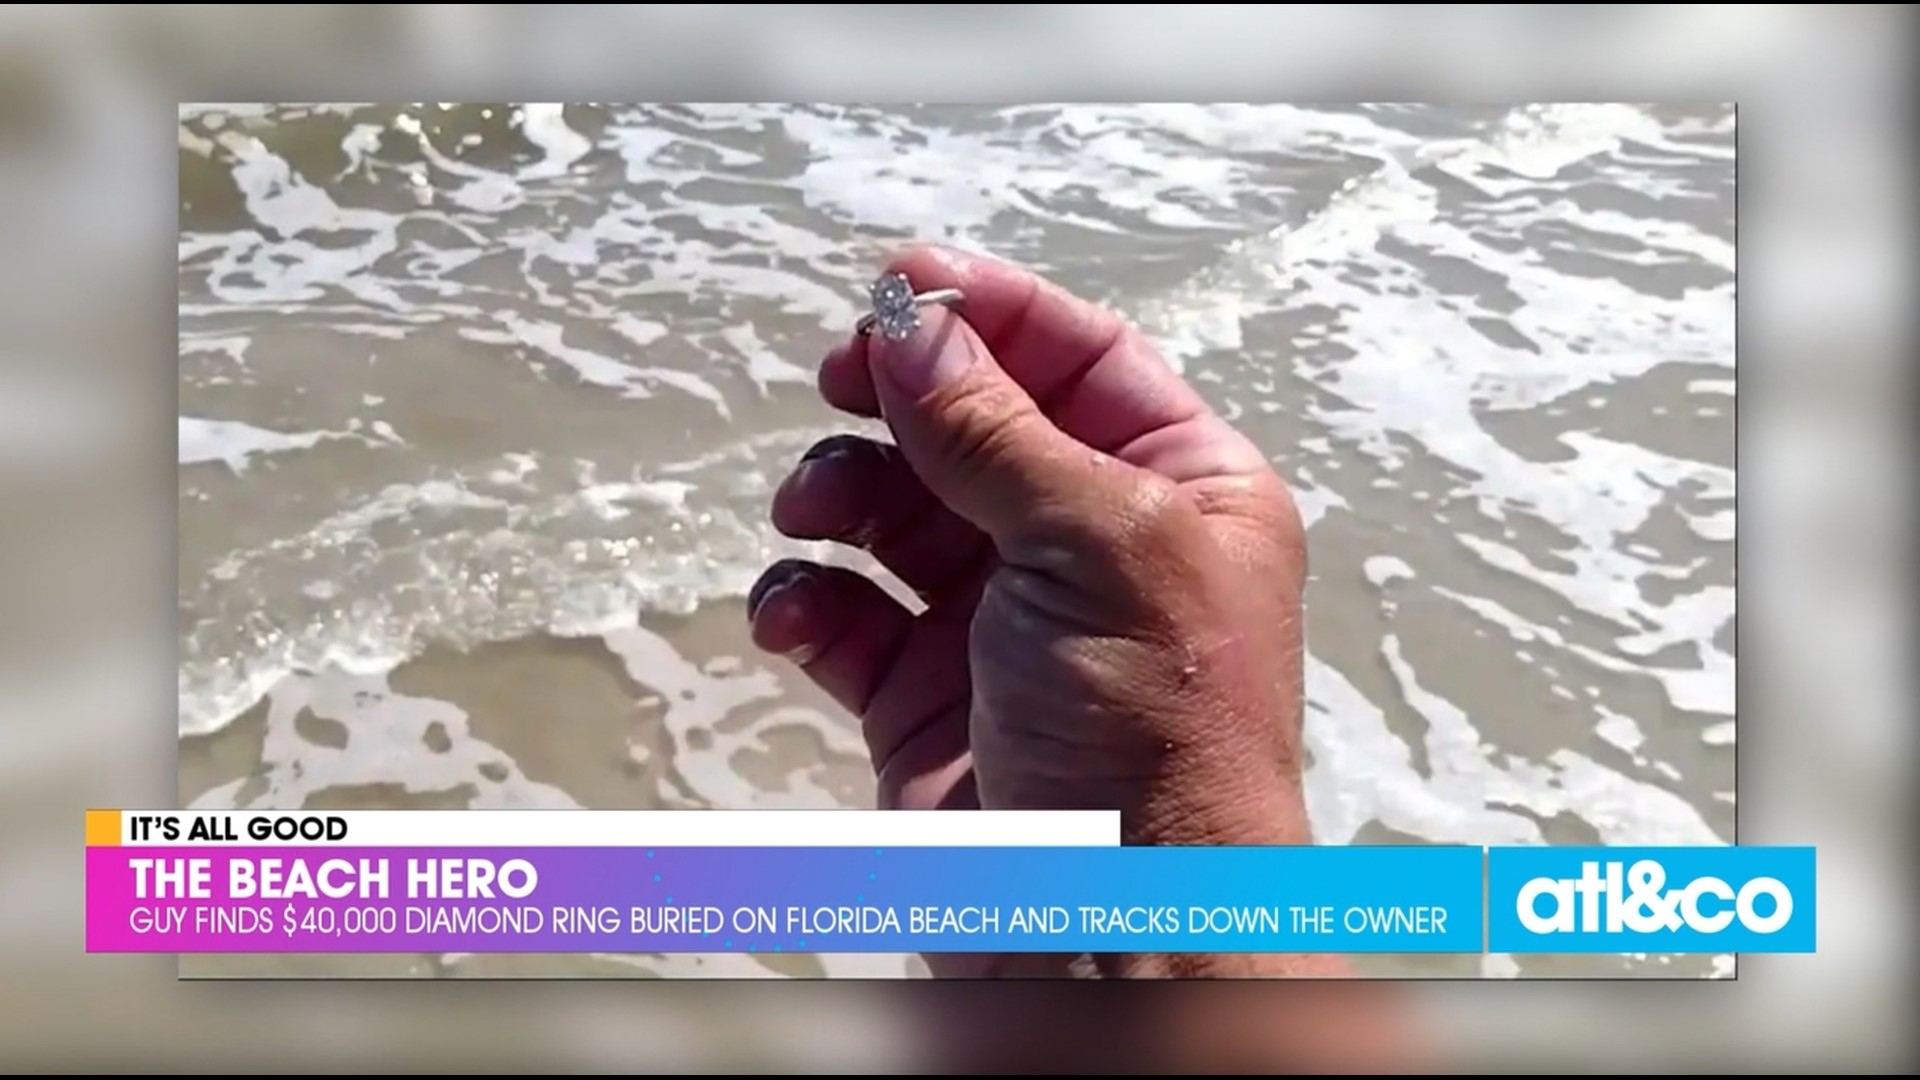 A Florida man found a $40,000 diamond ring buried on the beach and tracked down the owner.